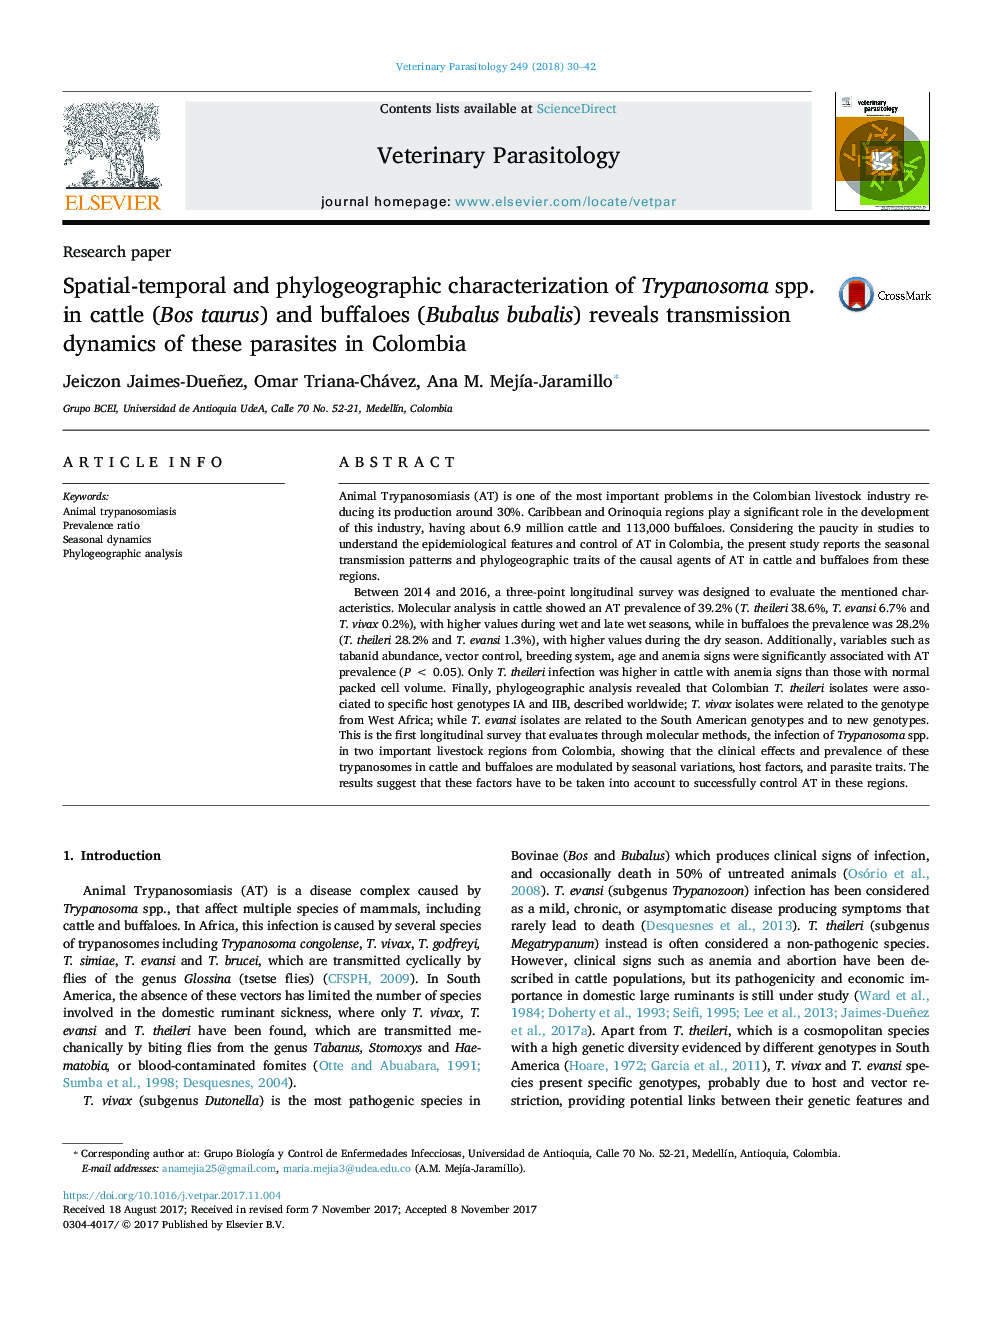 Spatial-temporal and phylogeographic characterization of Trypanosoma spp. in cattle (Bos taurus) and buffaloes (Bubalus bubalis) reveals transmission dynamics of these parasites in Colombia